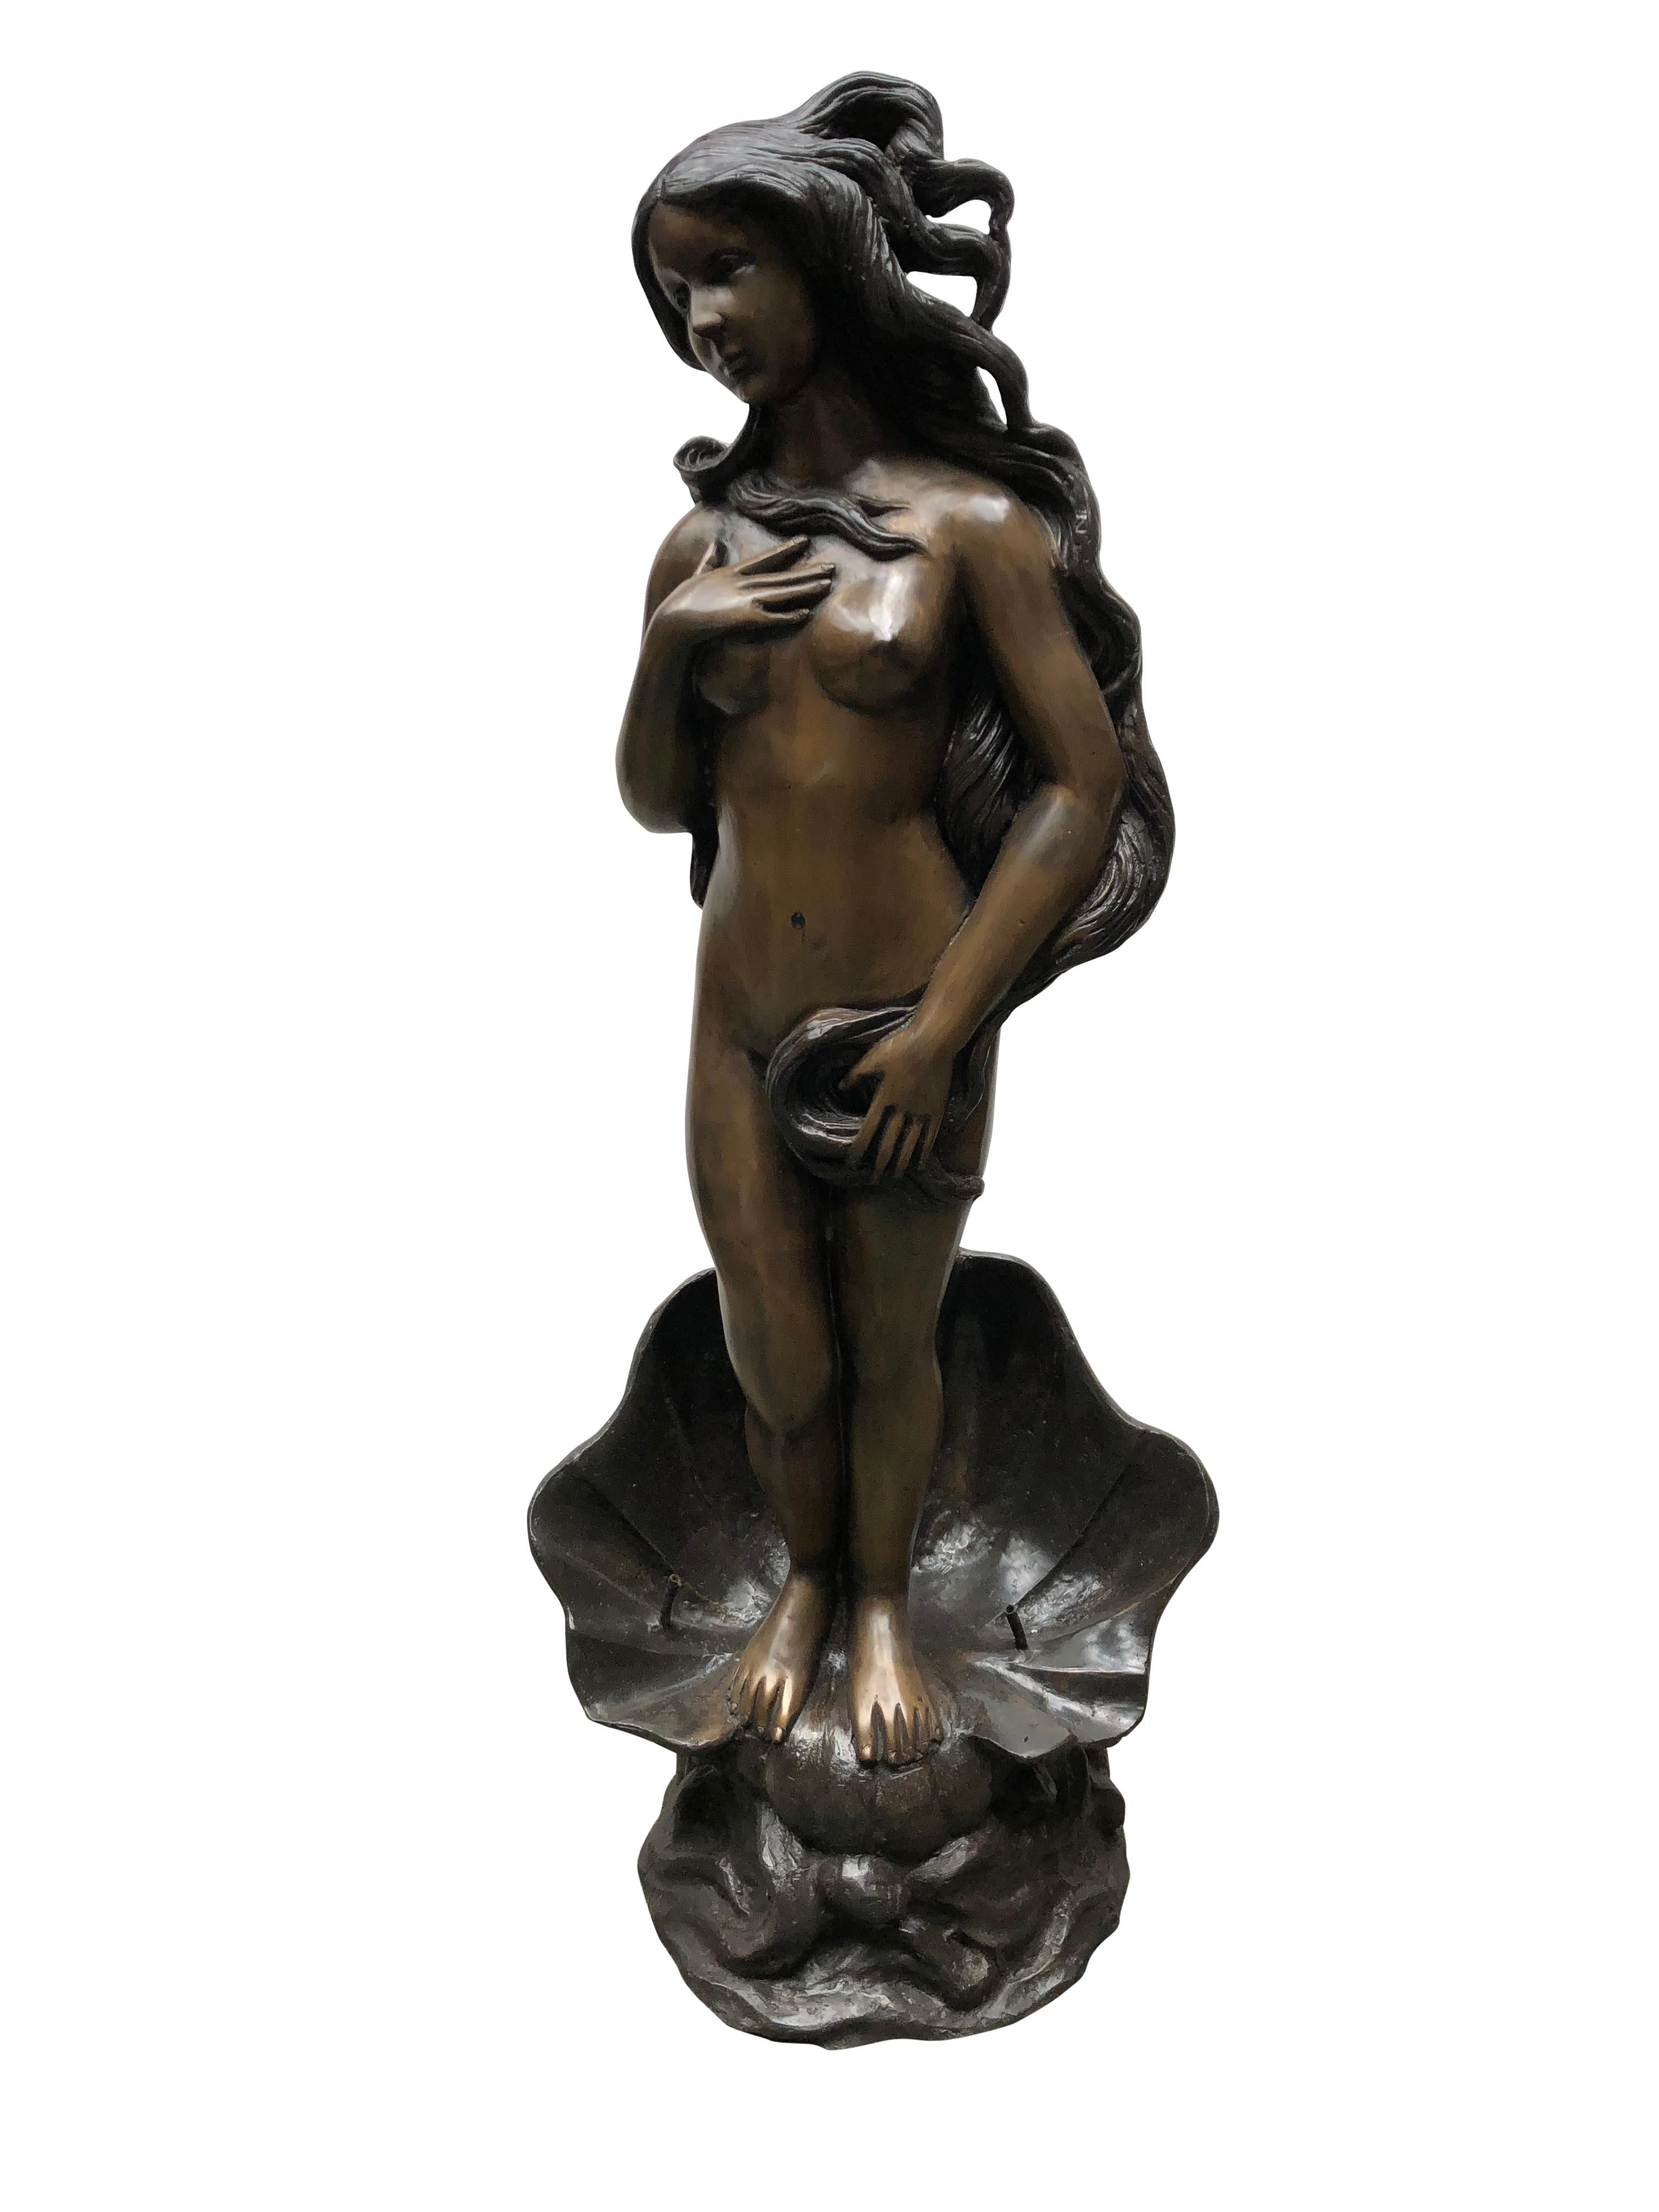 A gorgeous French Rococo bronze fountain in the form of a nude female. Stands at just under four feet tall so good size. Gorgeous female stands on the large conch shell at the base. You can see the two water outlets in the conch. Great patina to the